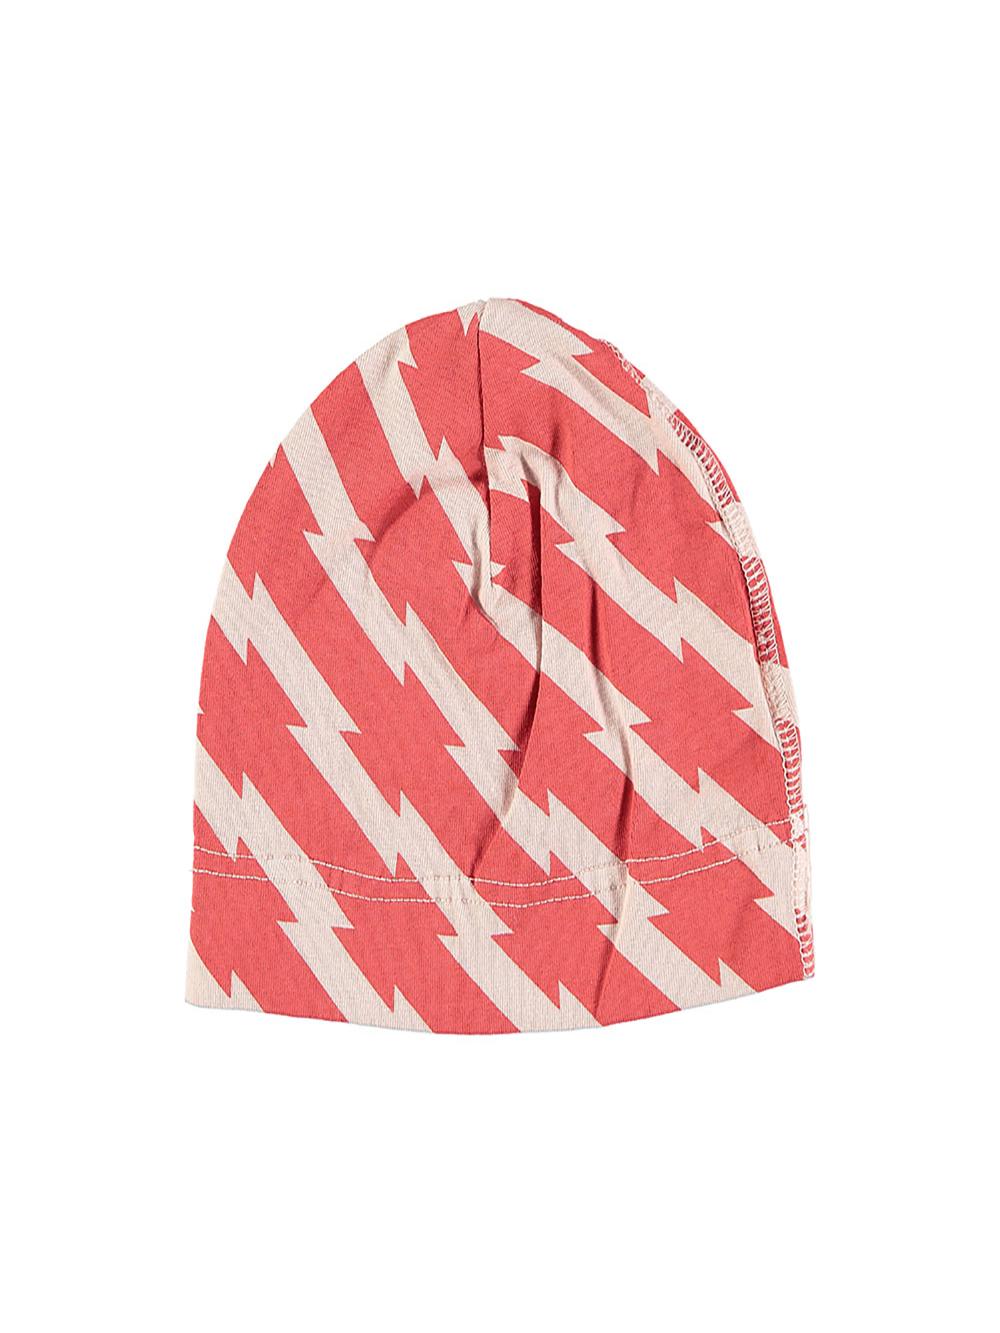 PINK HAT WITH RED STRIPES PRINT